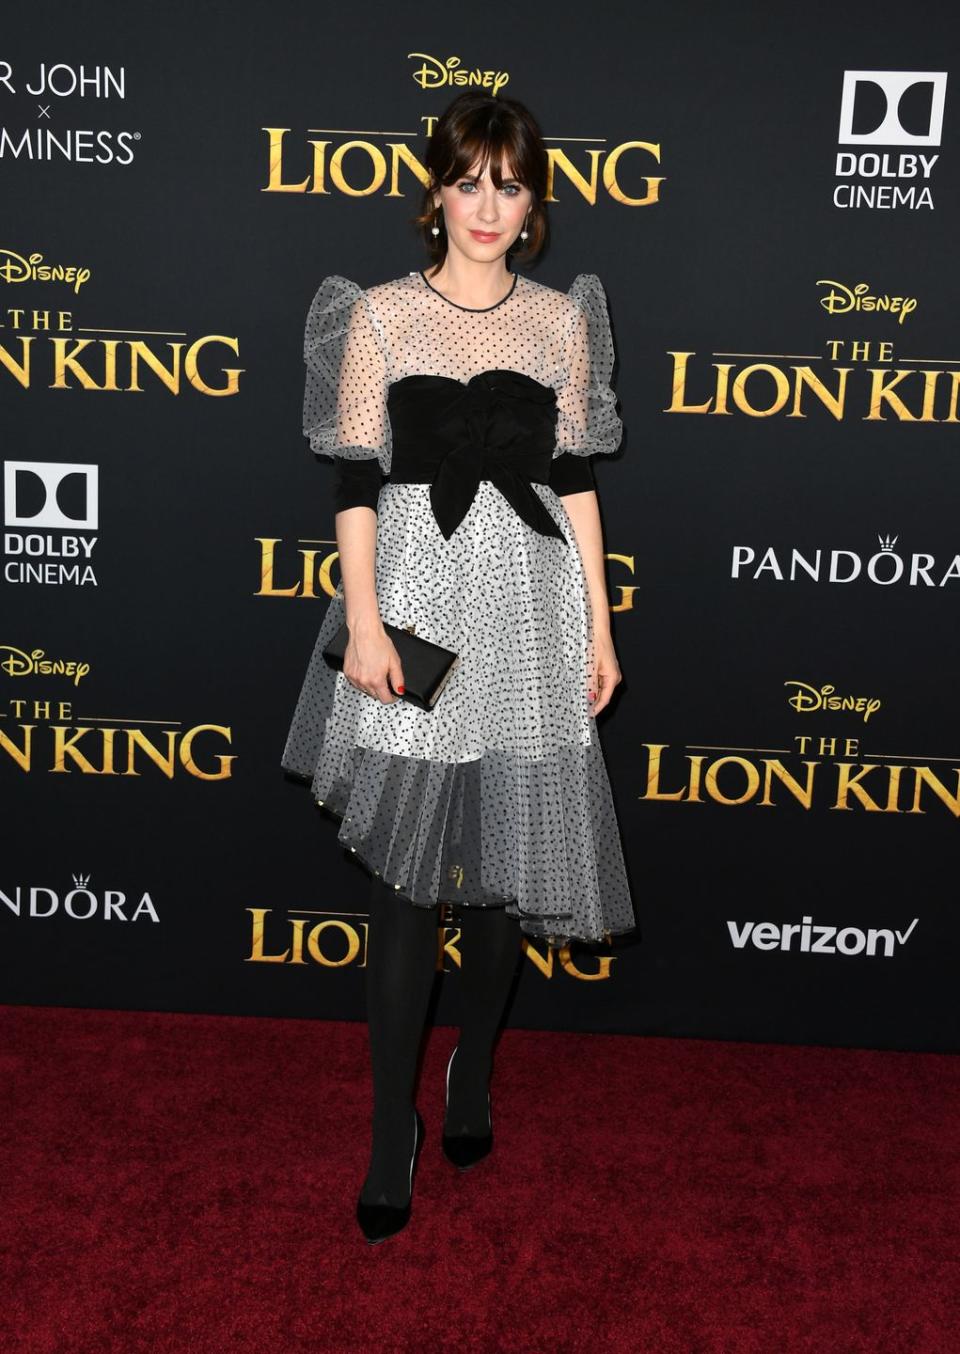 See All the Red Carpet Looks From 'The Lion King' Premiere